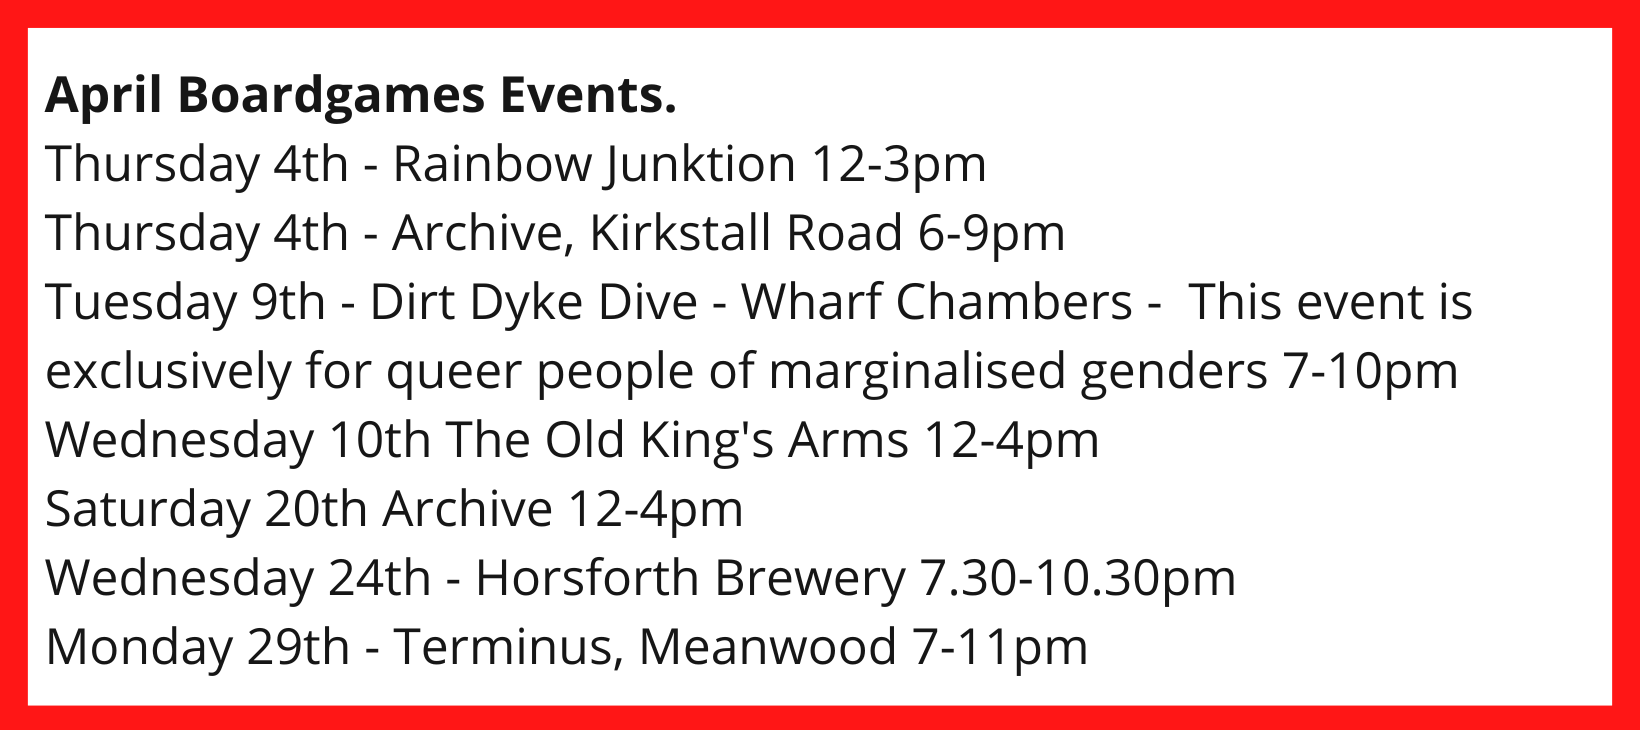 April Boardgames Events. Thursday 4th - Rainbow Junktion 12-3pm Thursday 4th - Archive, Kirkstall Road 6-9pm Tuesday 9th - Dirt Dyke Dive - Wharf Chambers - This event is exclusively for queer people of marginalised genders 7-10pm Wednesday 10th The Old King's Arms 12-4pm Saturday 20th Archive 12-4pm Wednesday 24th - Horsforth Brewery 7.30-10.30pm Monday 29th - Terminus, Meanwood 7-11pm